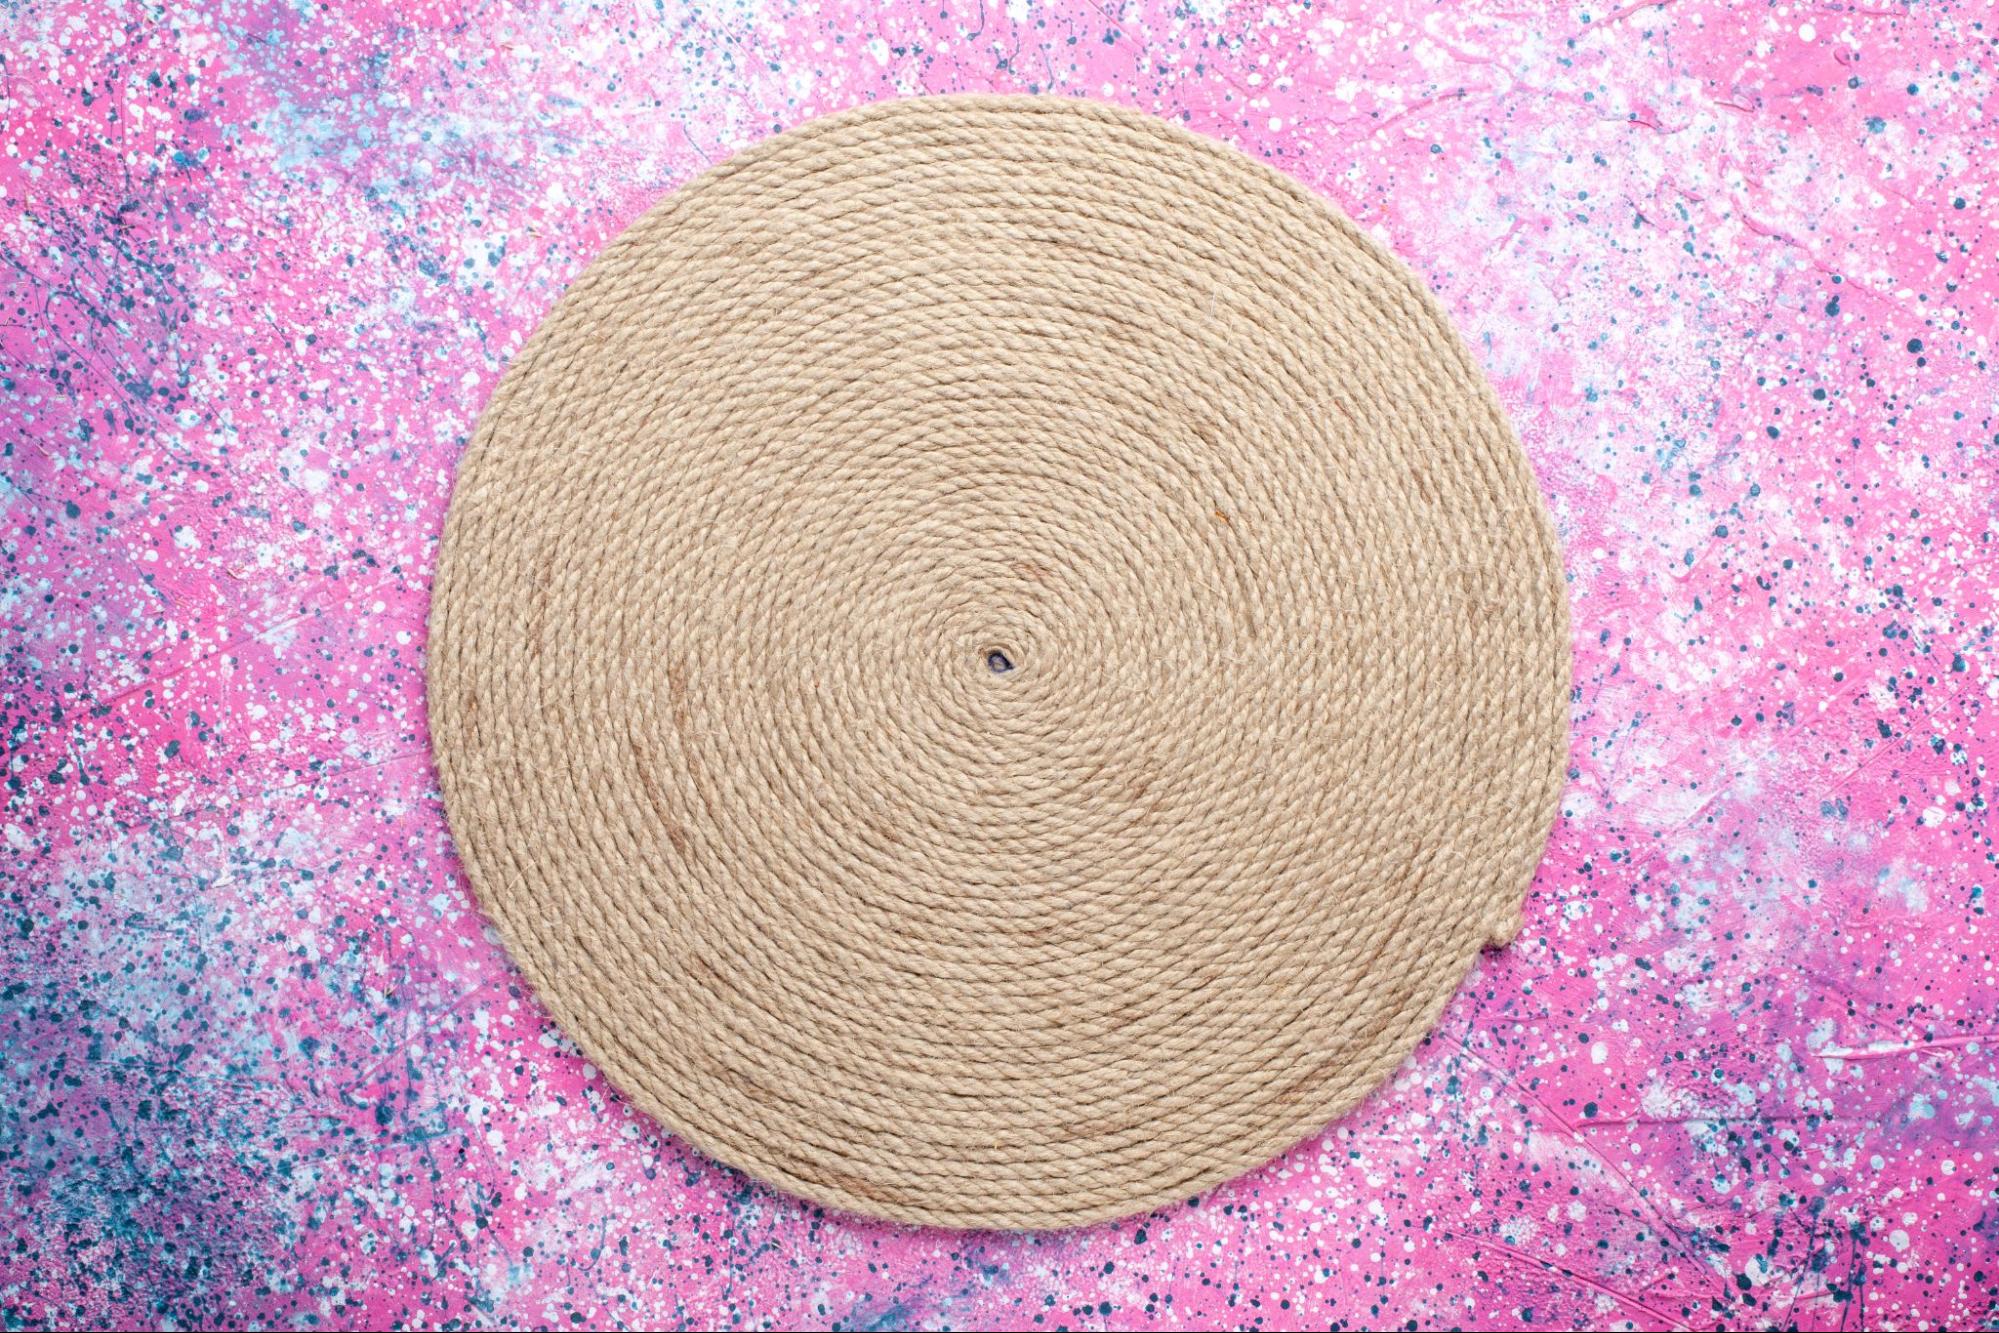 Circular travel changing mat on a vibrant background, a handy baby shower gift idea